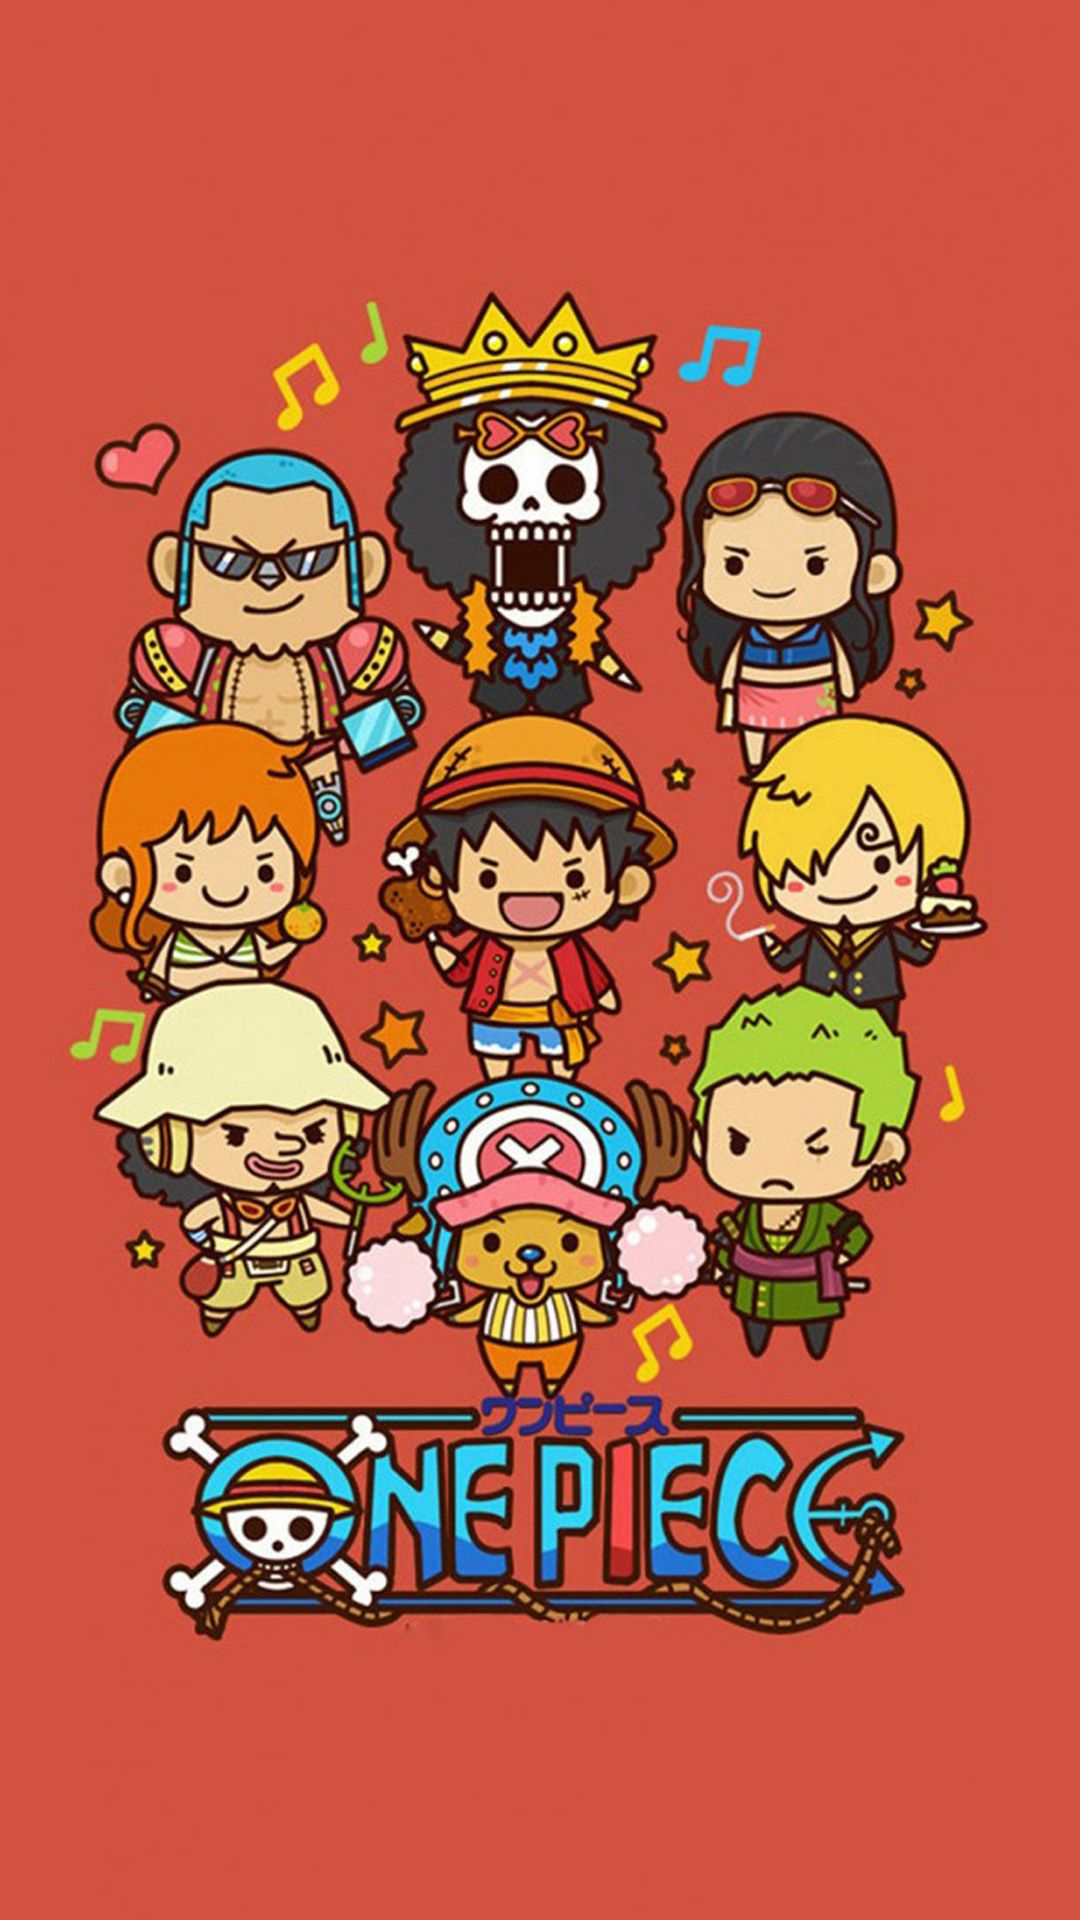 Cute Lovely One Piece Cartoon Poster iPhone 8 Wallpaper Free Download